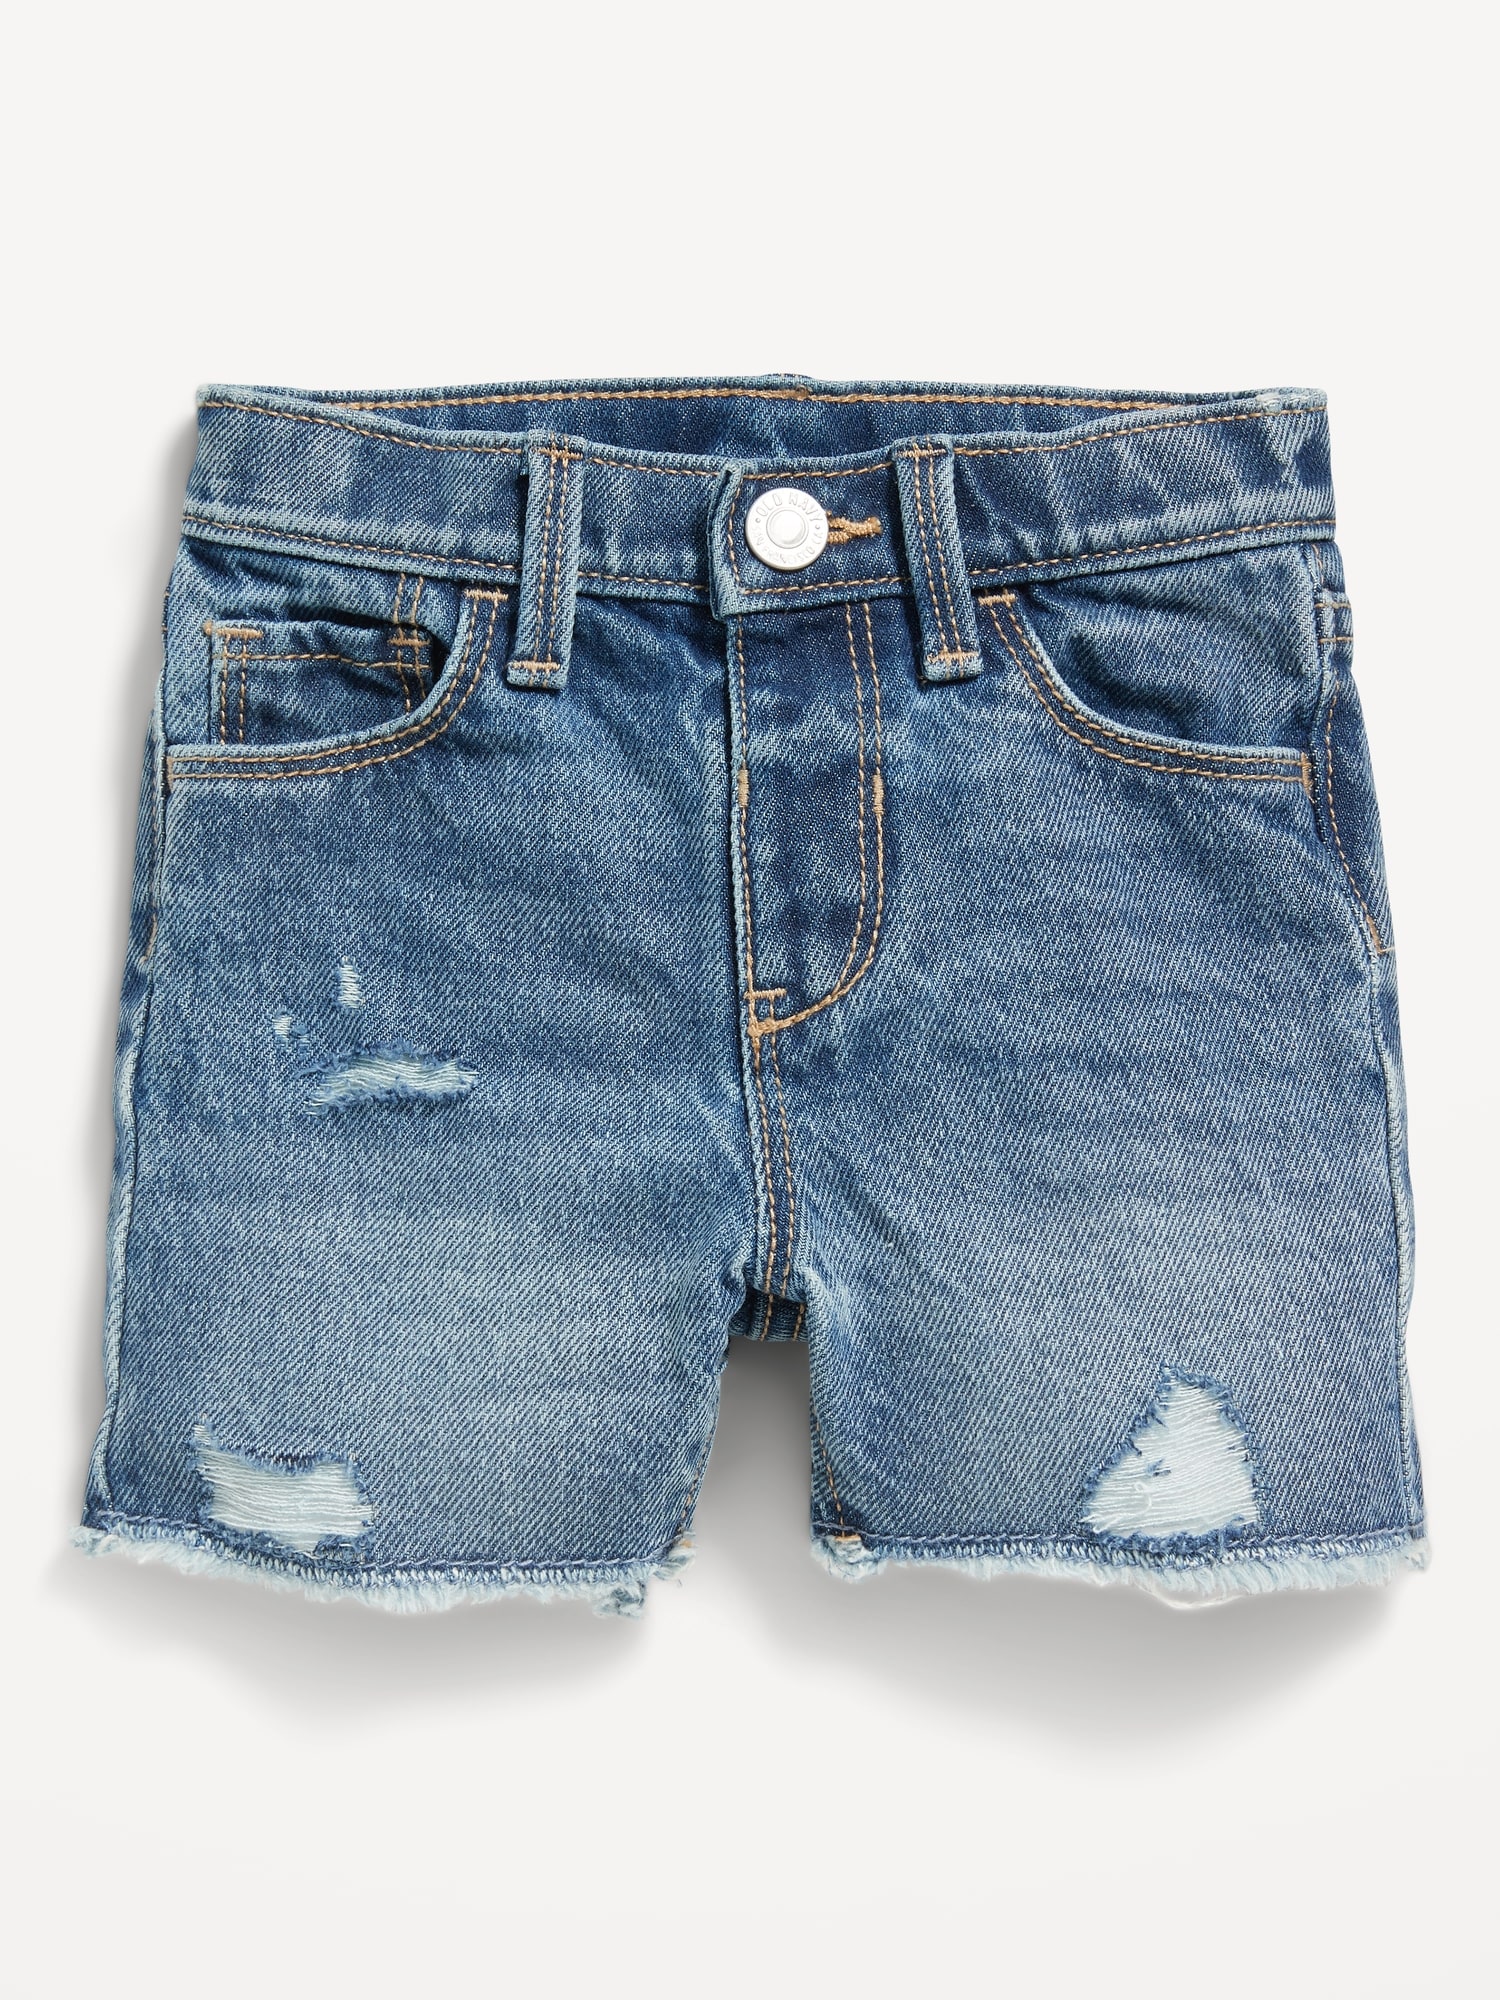 Ripped Cut-Off Jean Shorts for Toddler Girls | Old Navy